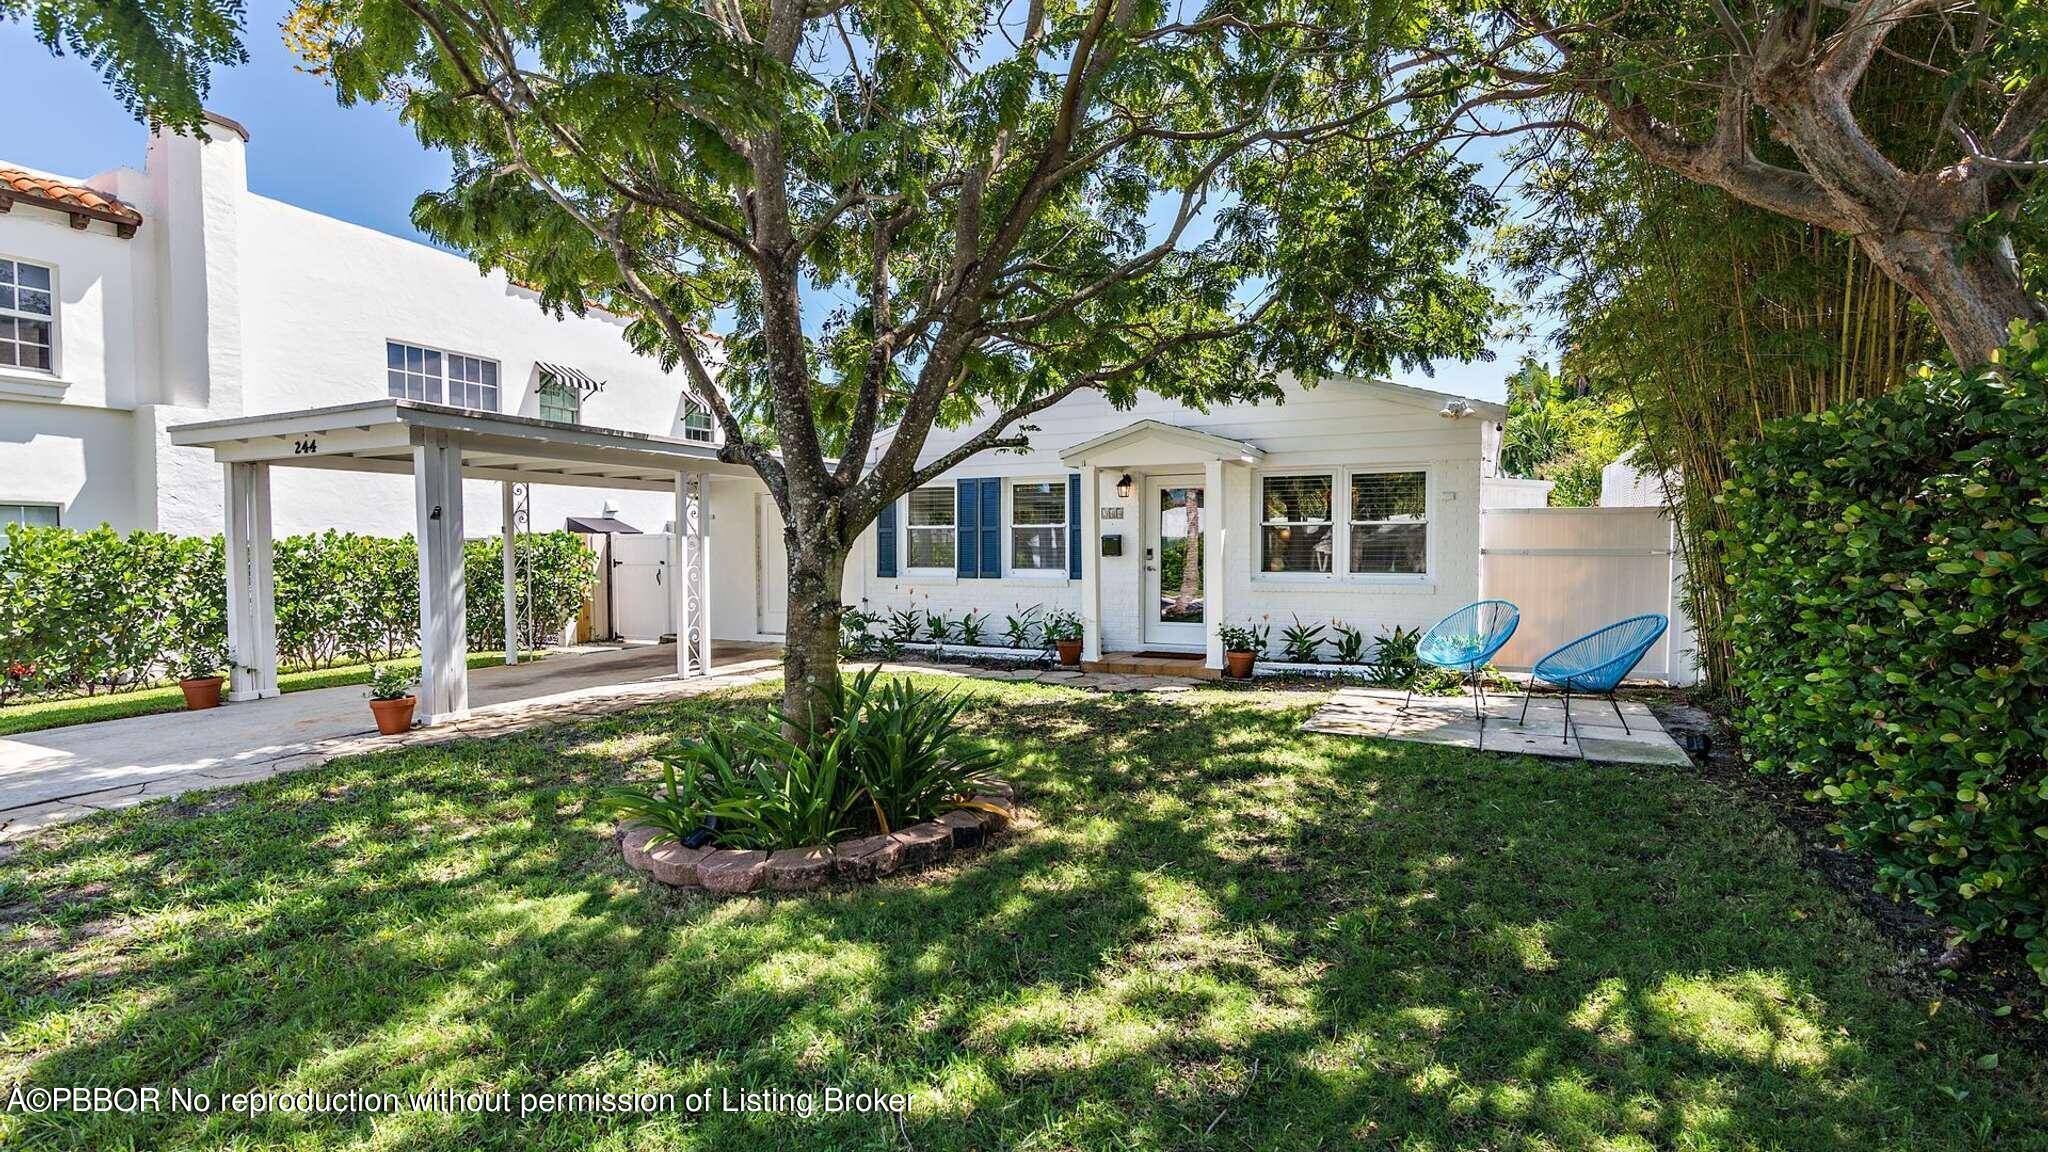 Brand new renovation and newly furnished, 3 bedroom, 2 bathroom home with private heated pool in SoSo neighborhood of West Palm Beach.